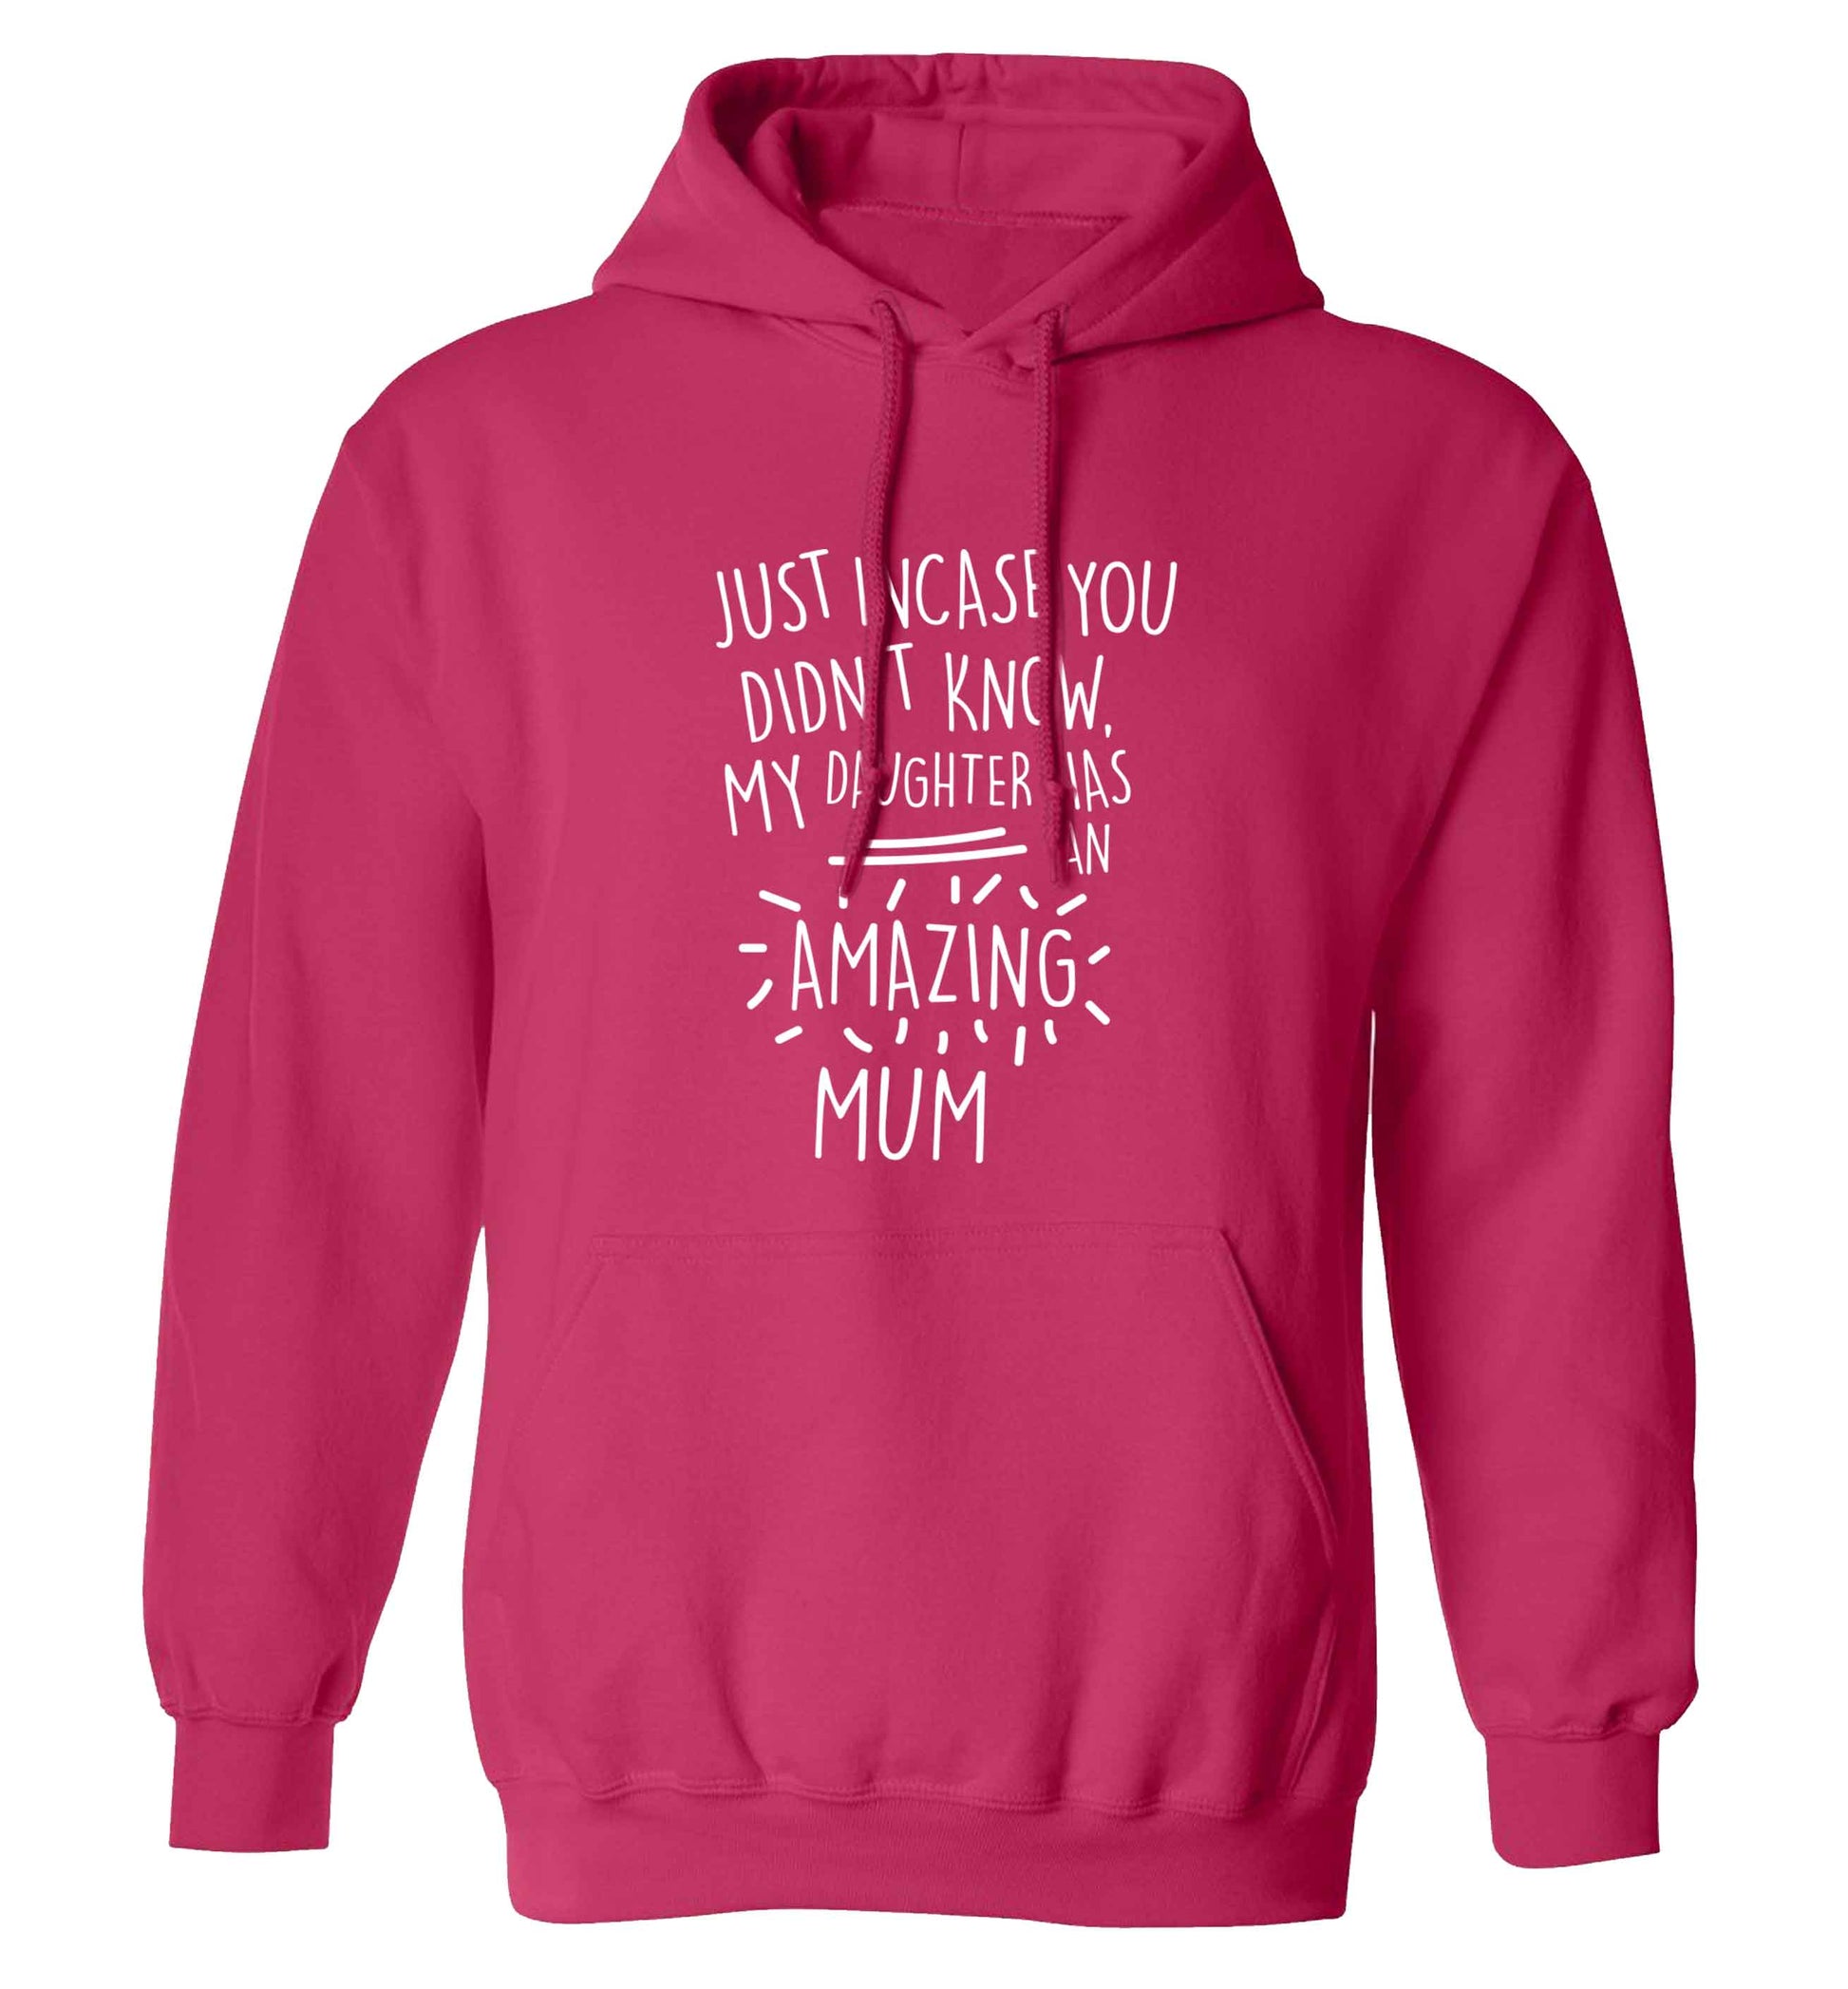 Just incase you didn't know my daughter has an amazing mum adults unisex pink hoodie 2XL